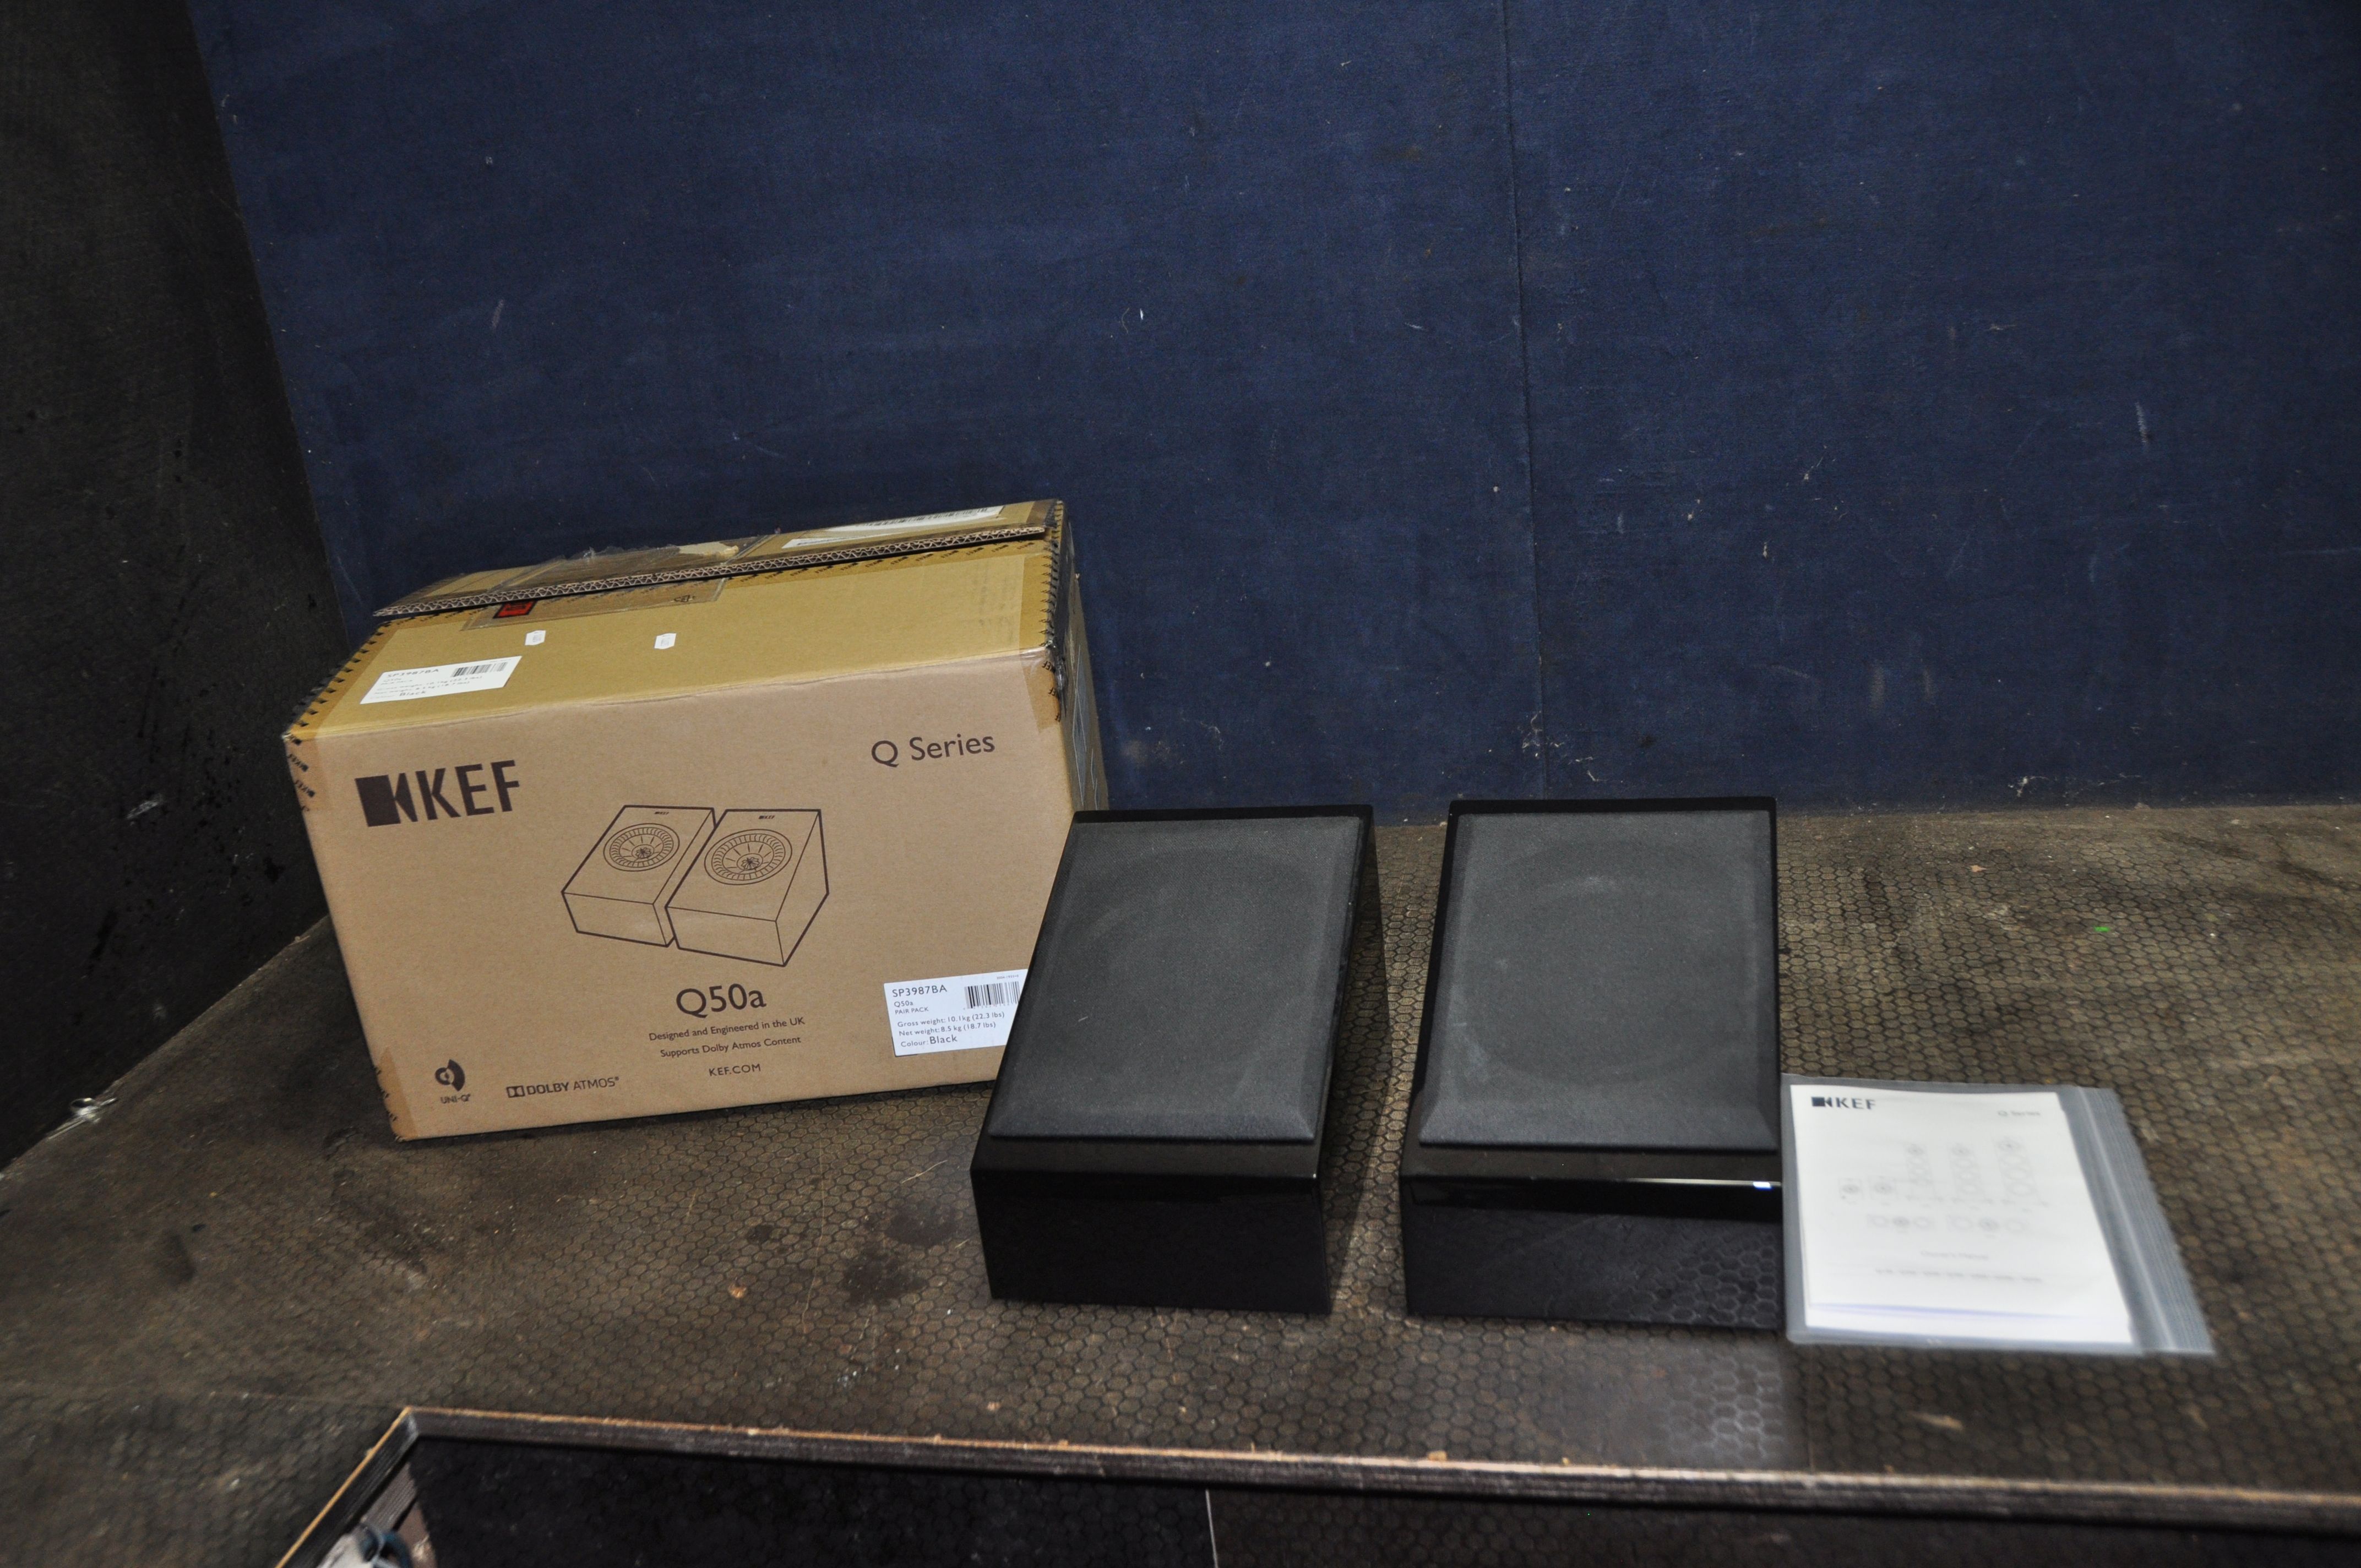 A PAIR OF KEF R50 IN GLOSS BLACK FINISH in a Q50a box with Guarantee card and manuals